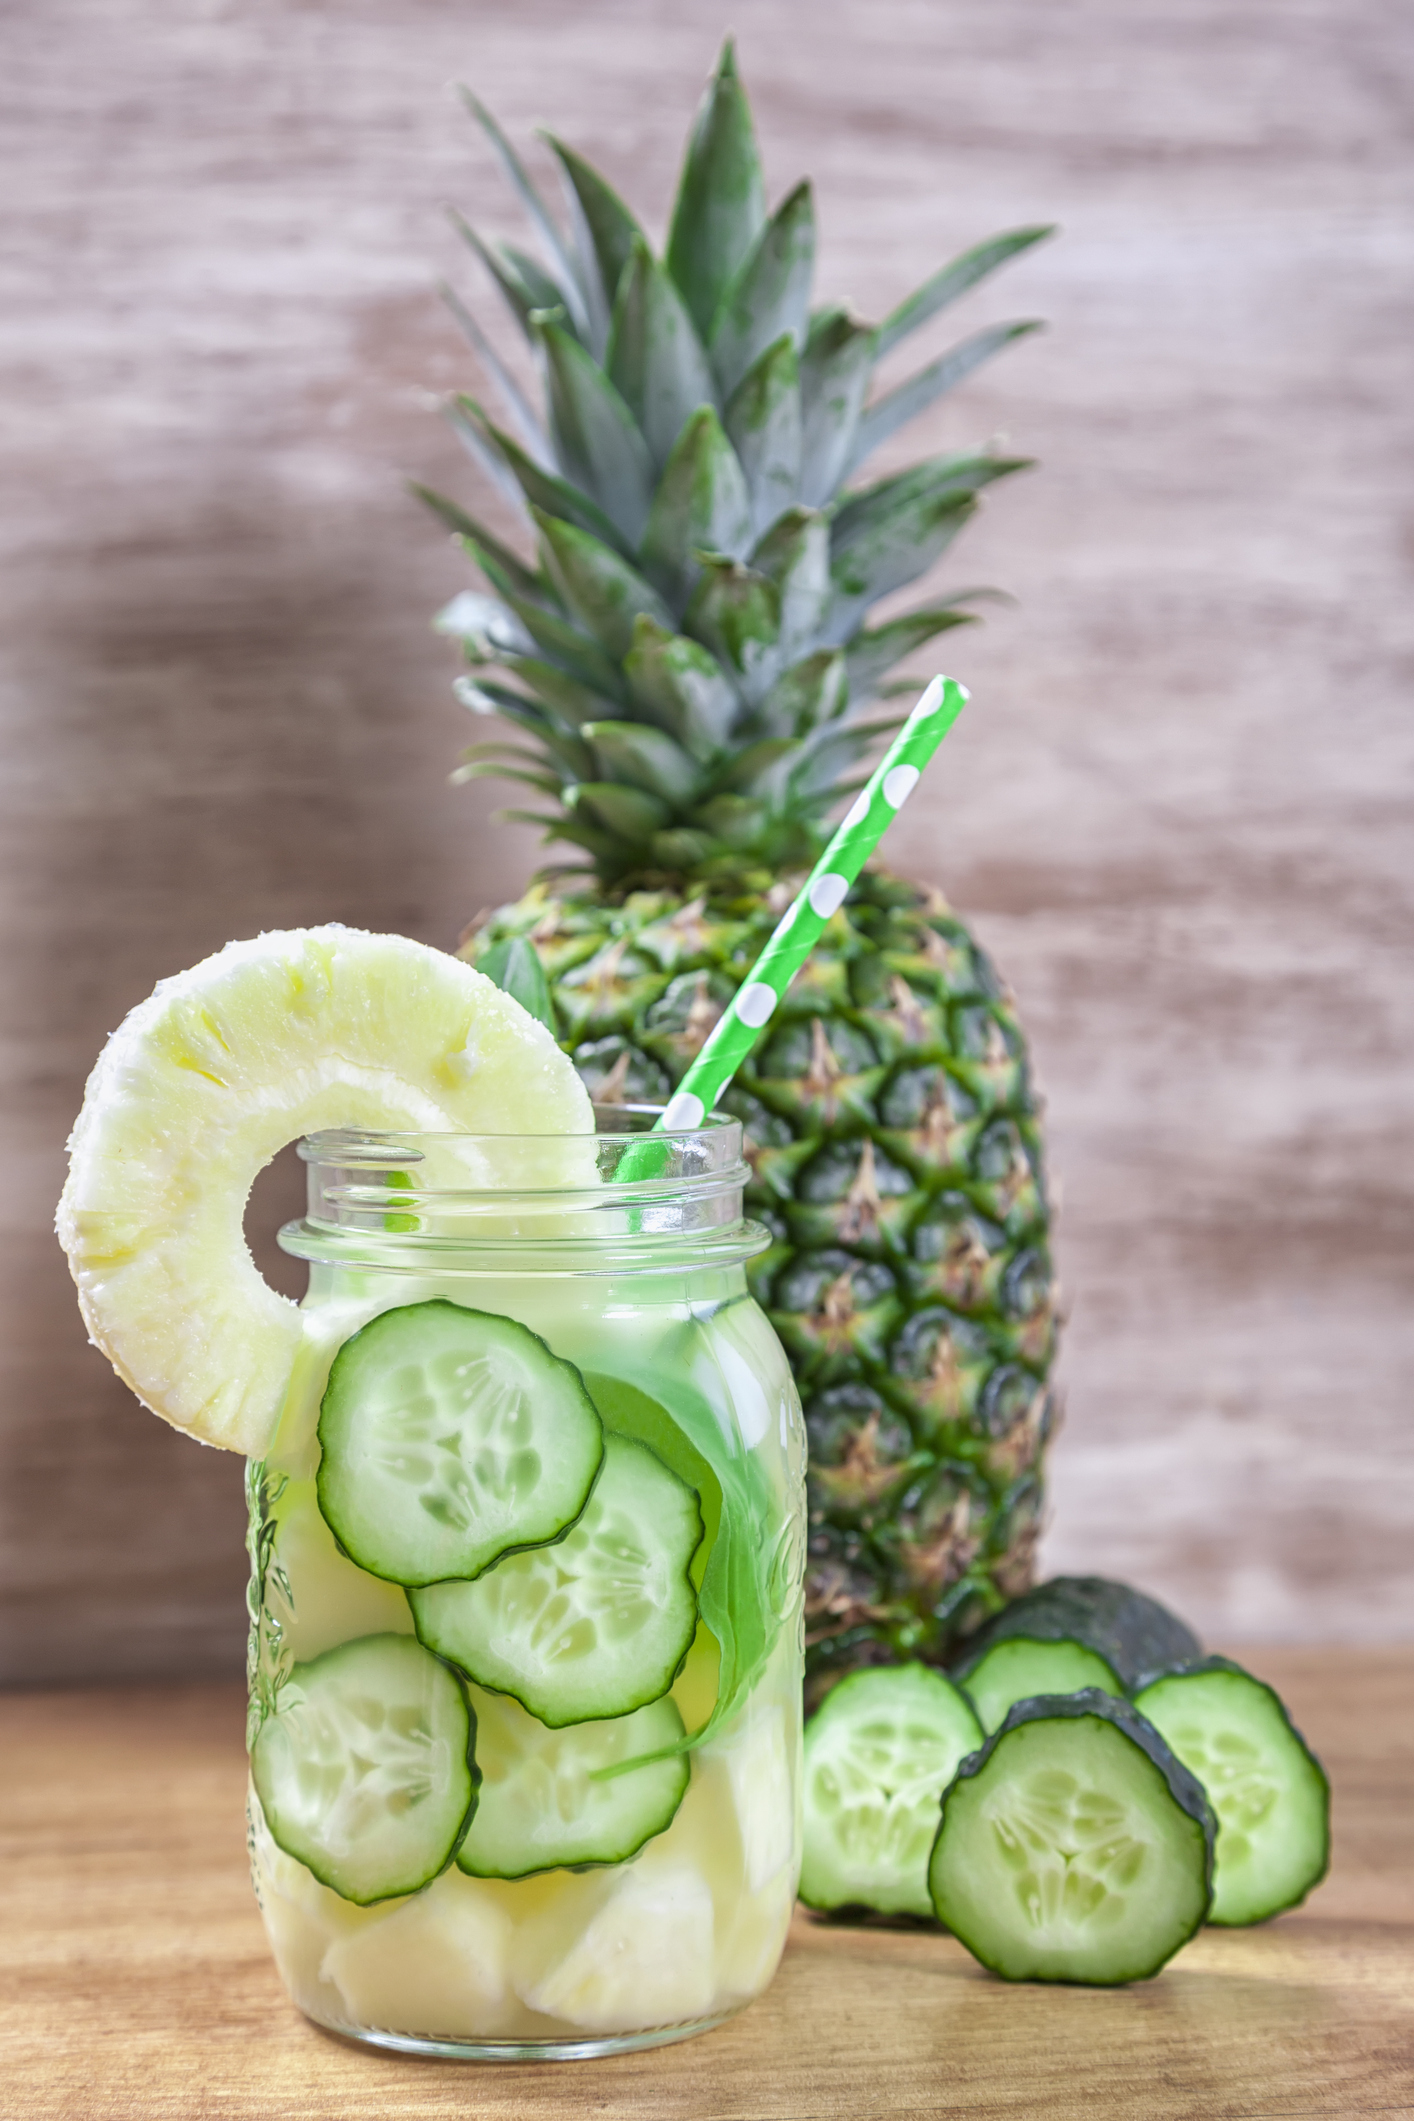 Cucumber and Pineapple Juice